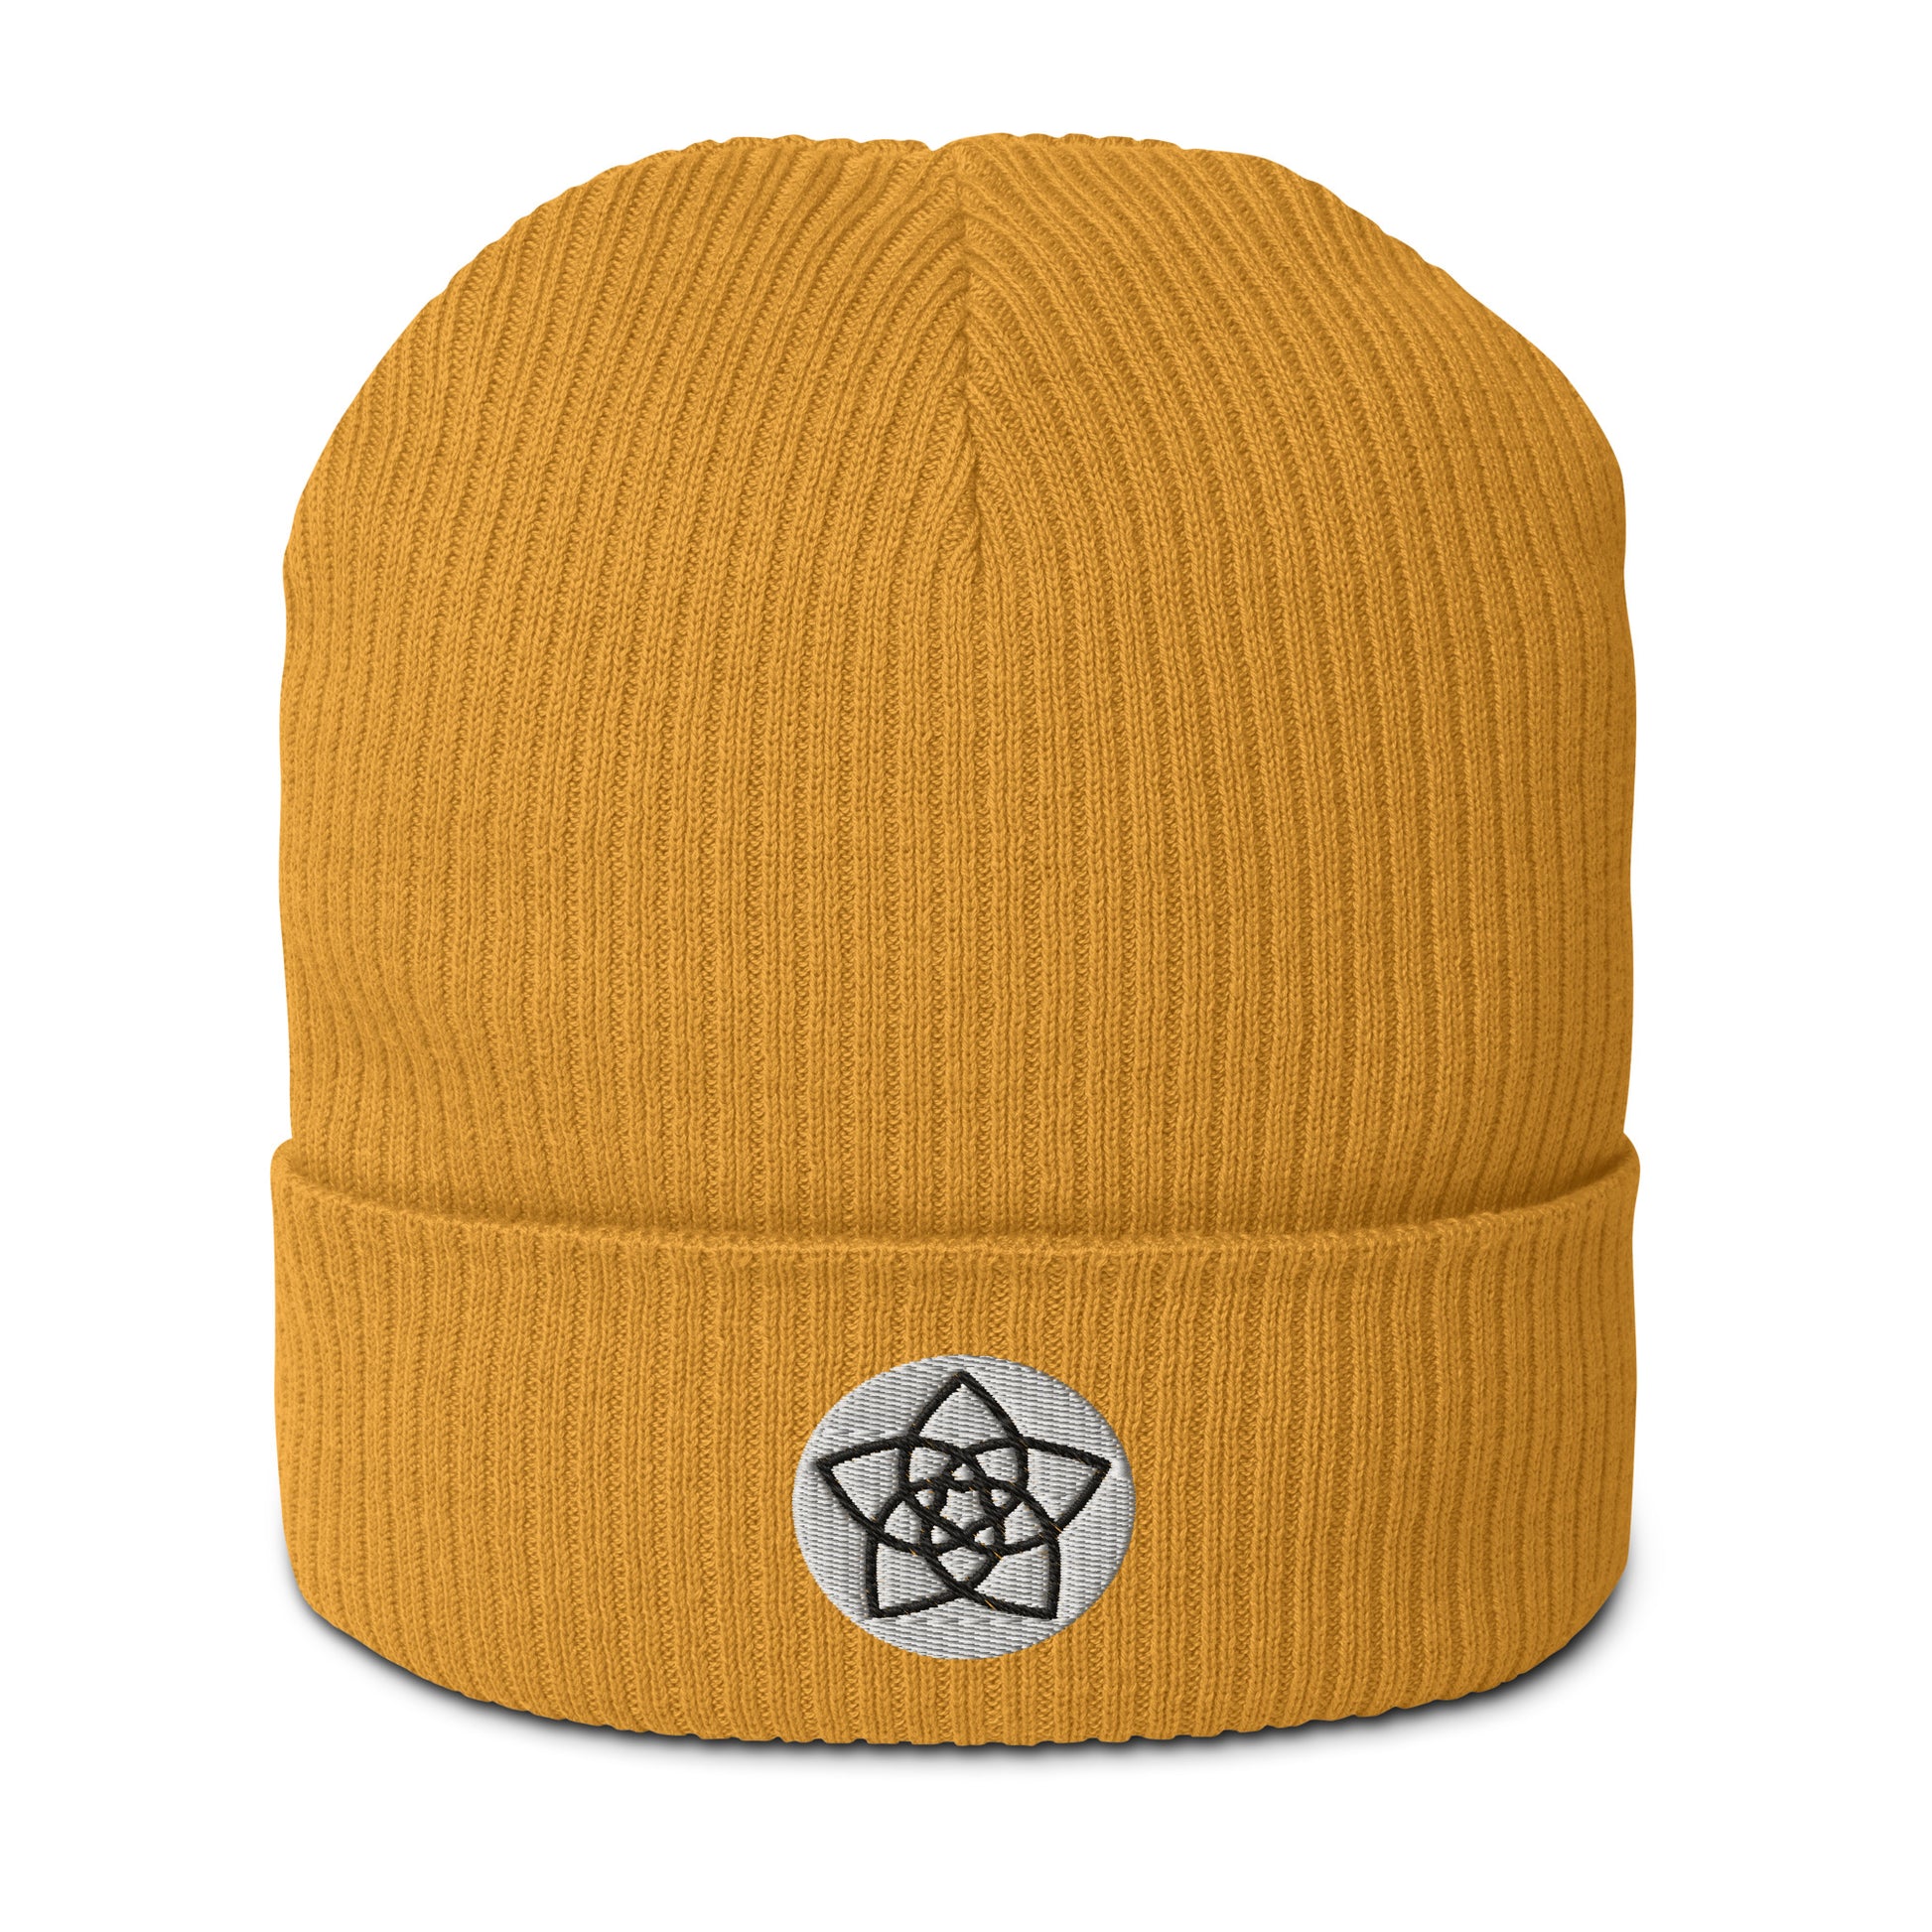 Tune into your inner goddess with our Venus Flower Organic Cotton Beanie in Mustard Yellow. Crafted from organic cotton and embroidered with the Venus Flower symbol, this beanie is a tribute to the divine feminine, blooming with unity, balance, and celestial connections. Plus, it's made with breathable, lightweight fabric and natural materials, ensuring you feel as light as a petal while you're on your celestial journey. Snatch one of these beanies and infuse your style with a touch of Venusian magic.